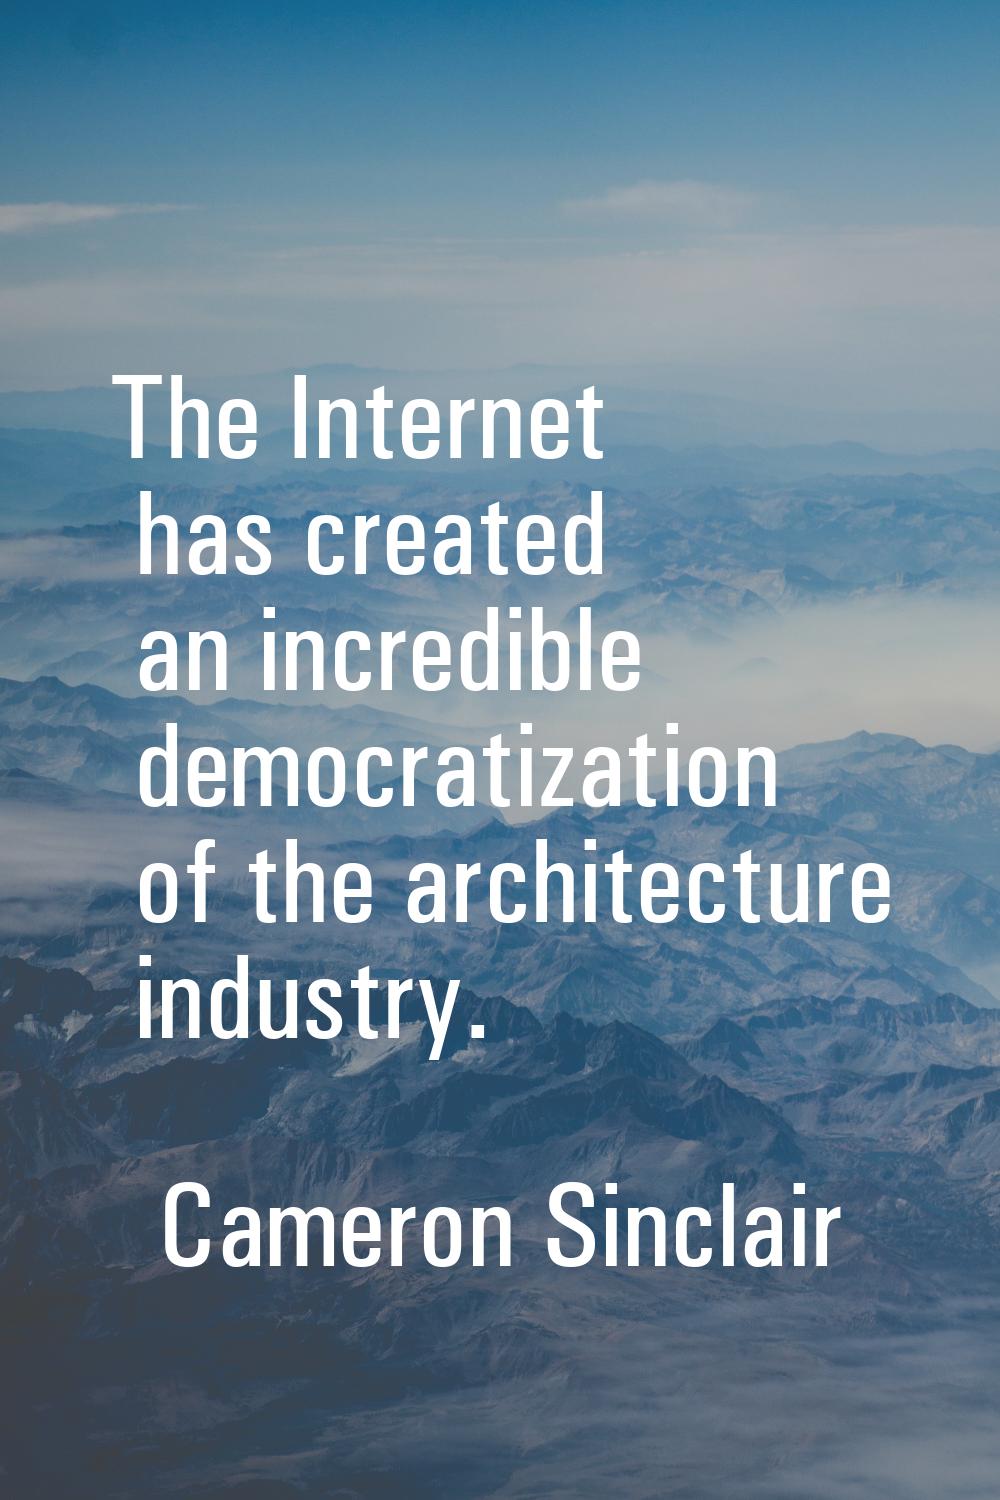 The Internet has created an incredible democratization of the architecture industry.